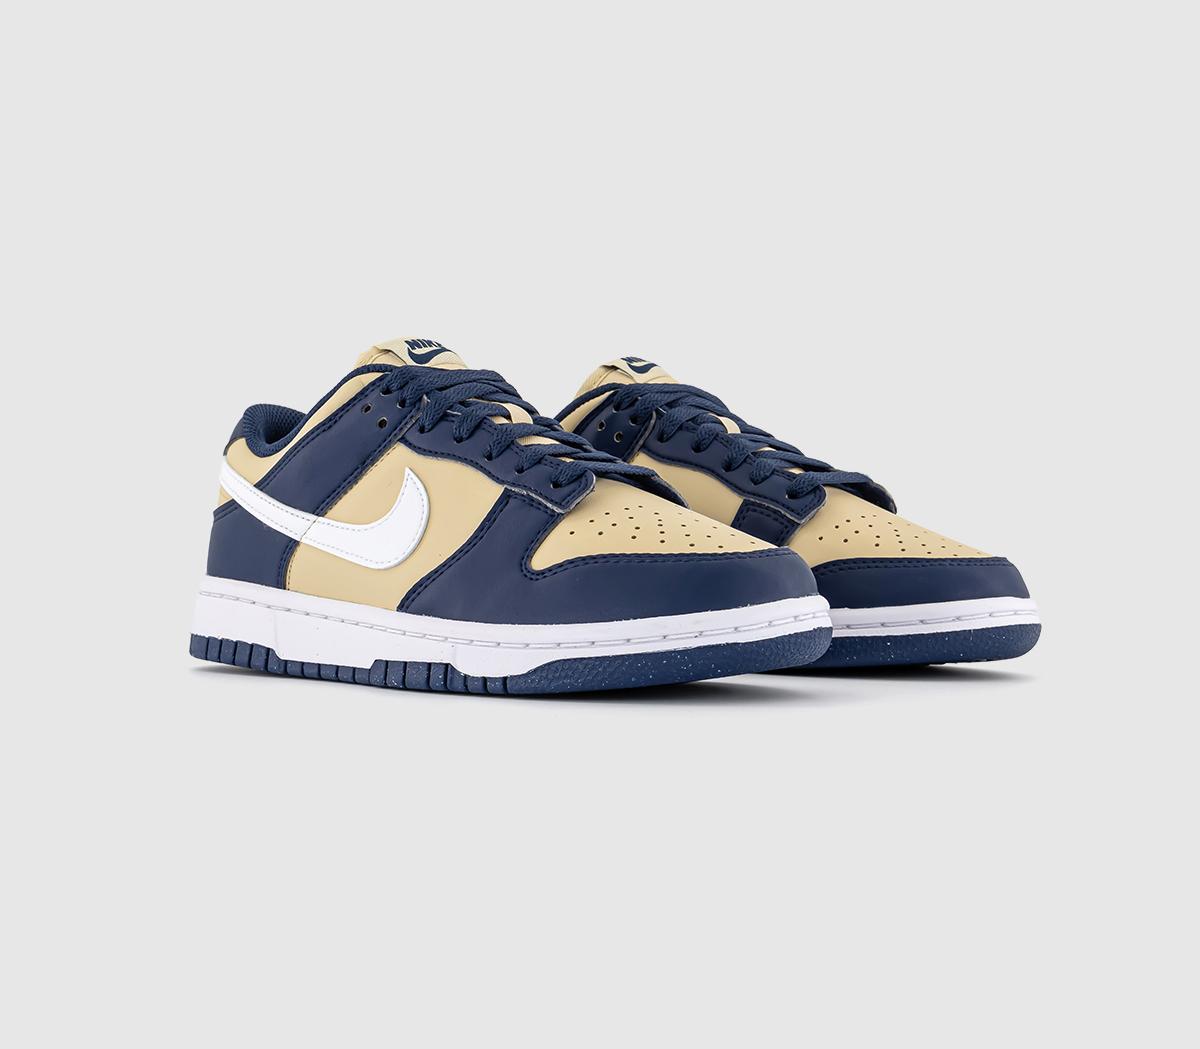 Nike Womens Dunk Low Trainers Midnight Navy White Team Gold Blue, 6.5